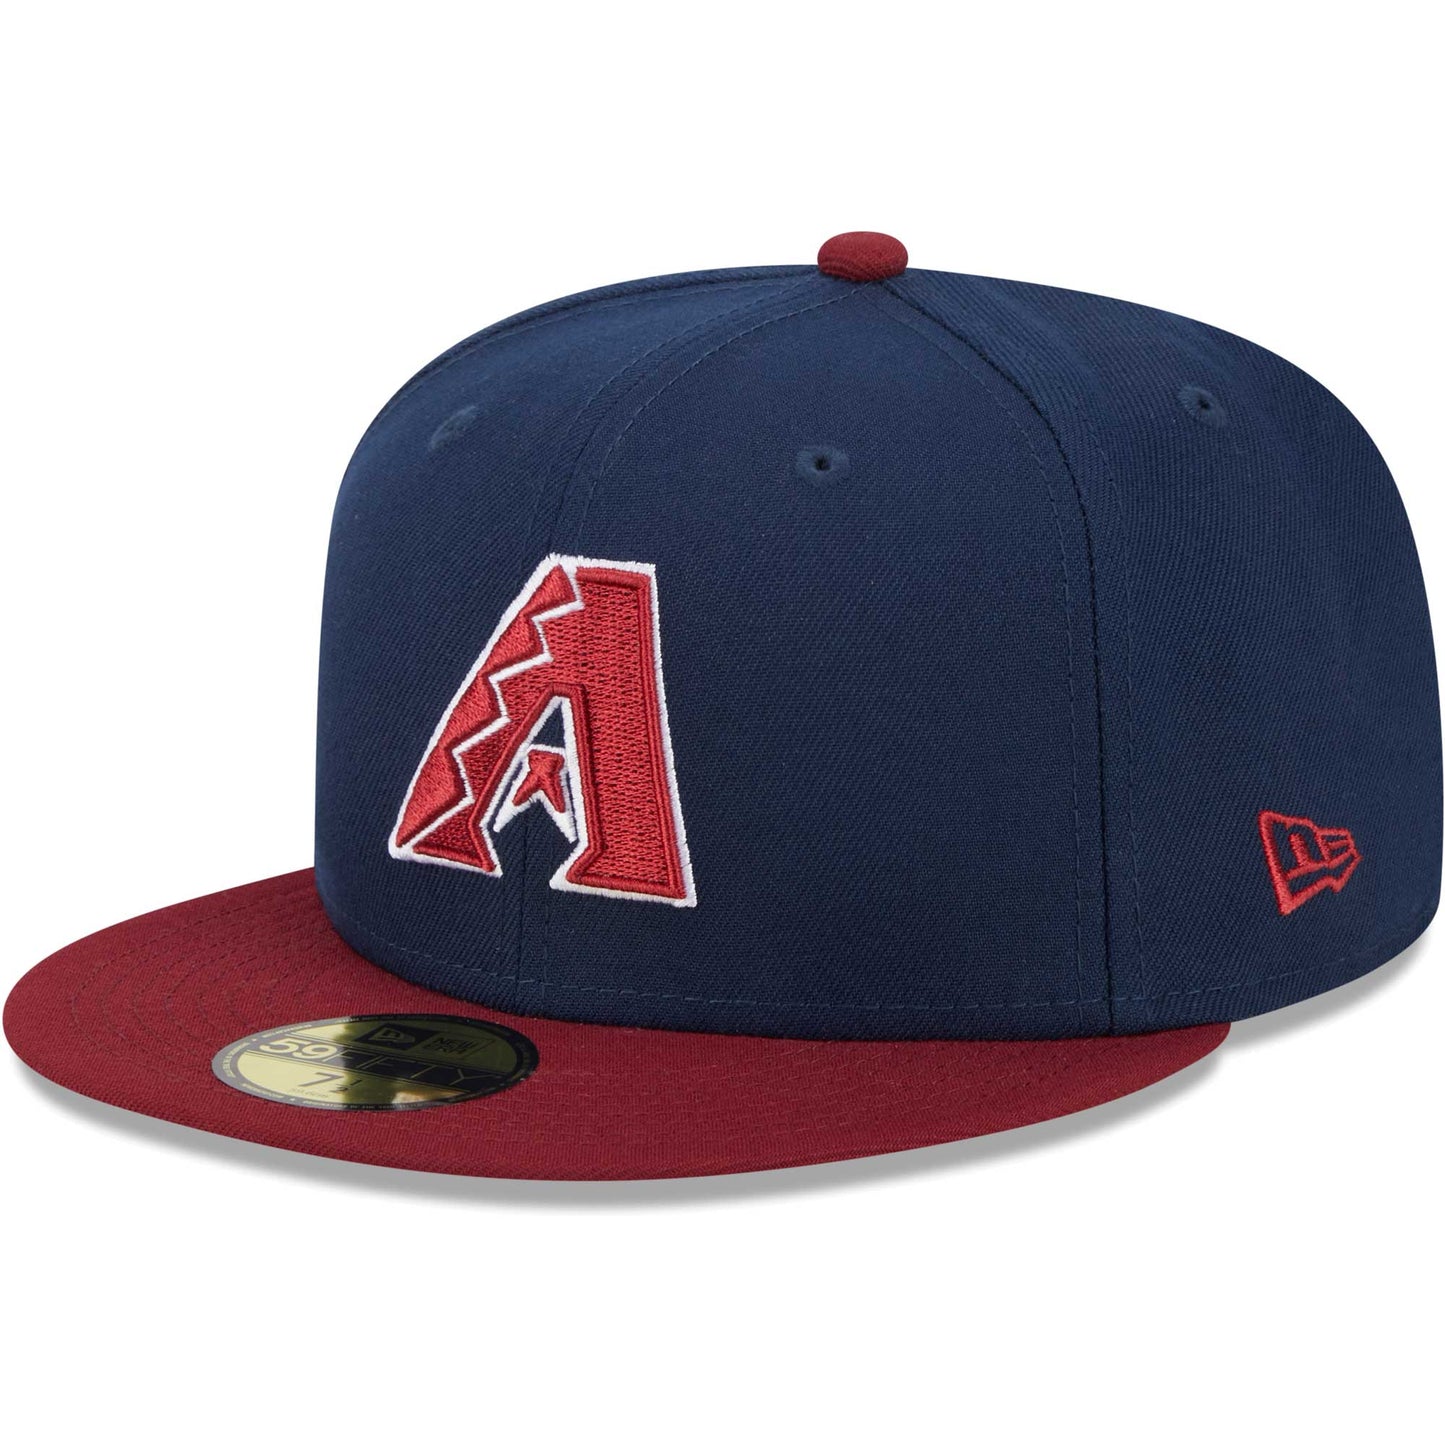 Arizona Diamondbacks New Era Two-Tone Color Pack 59FIFTY Fitted Hat - Navy